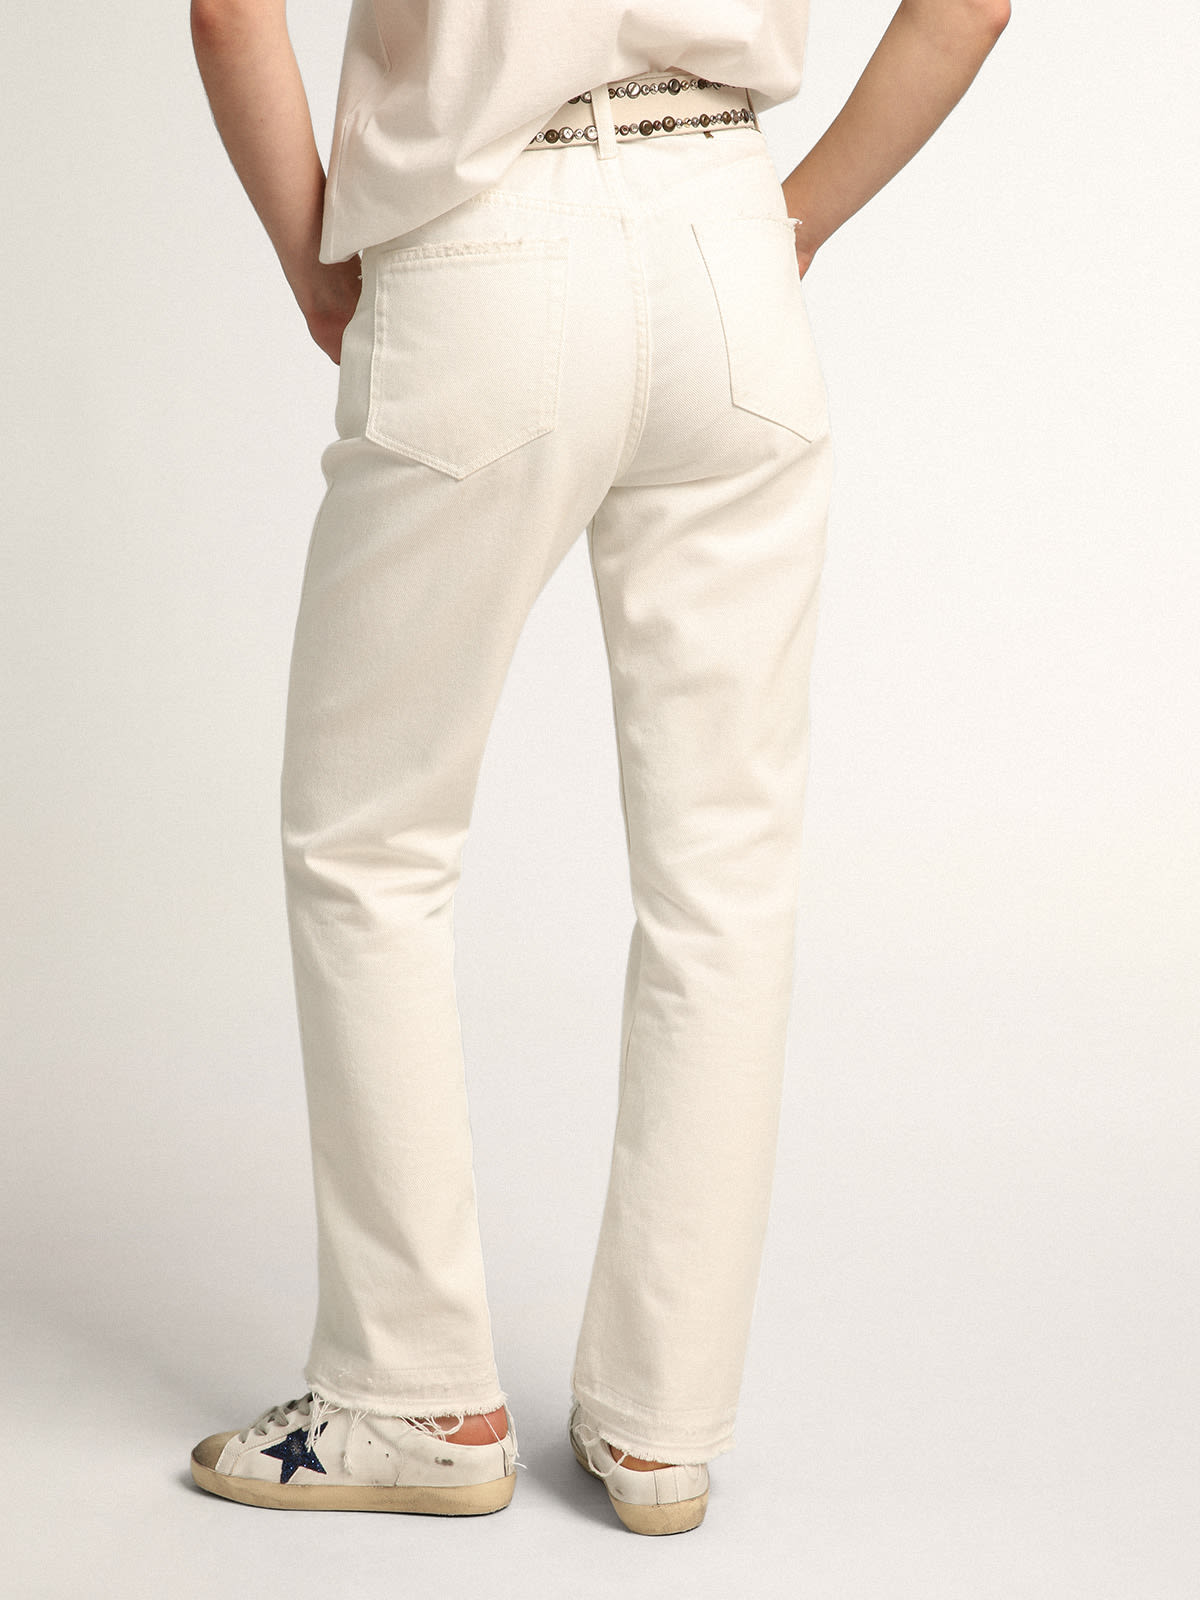 Golden Goose - Cropped Journey Collection pants in white bull denim with worn-out effect hem     in 